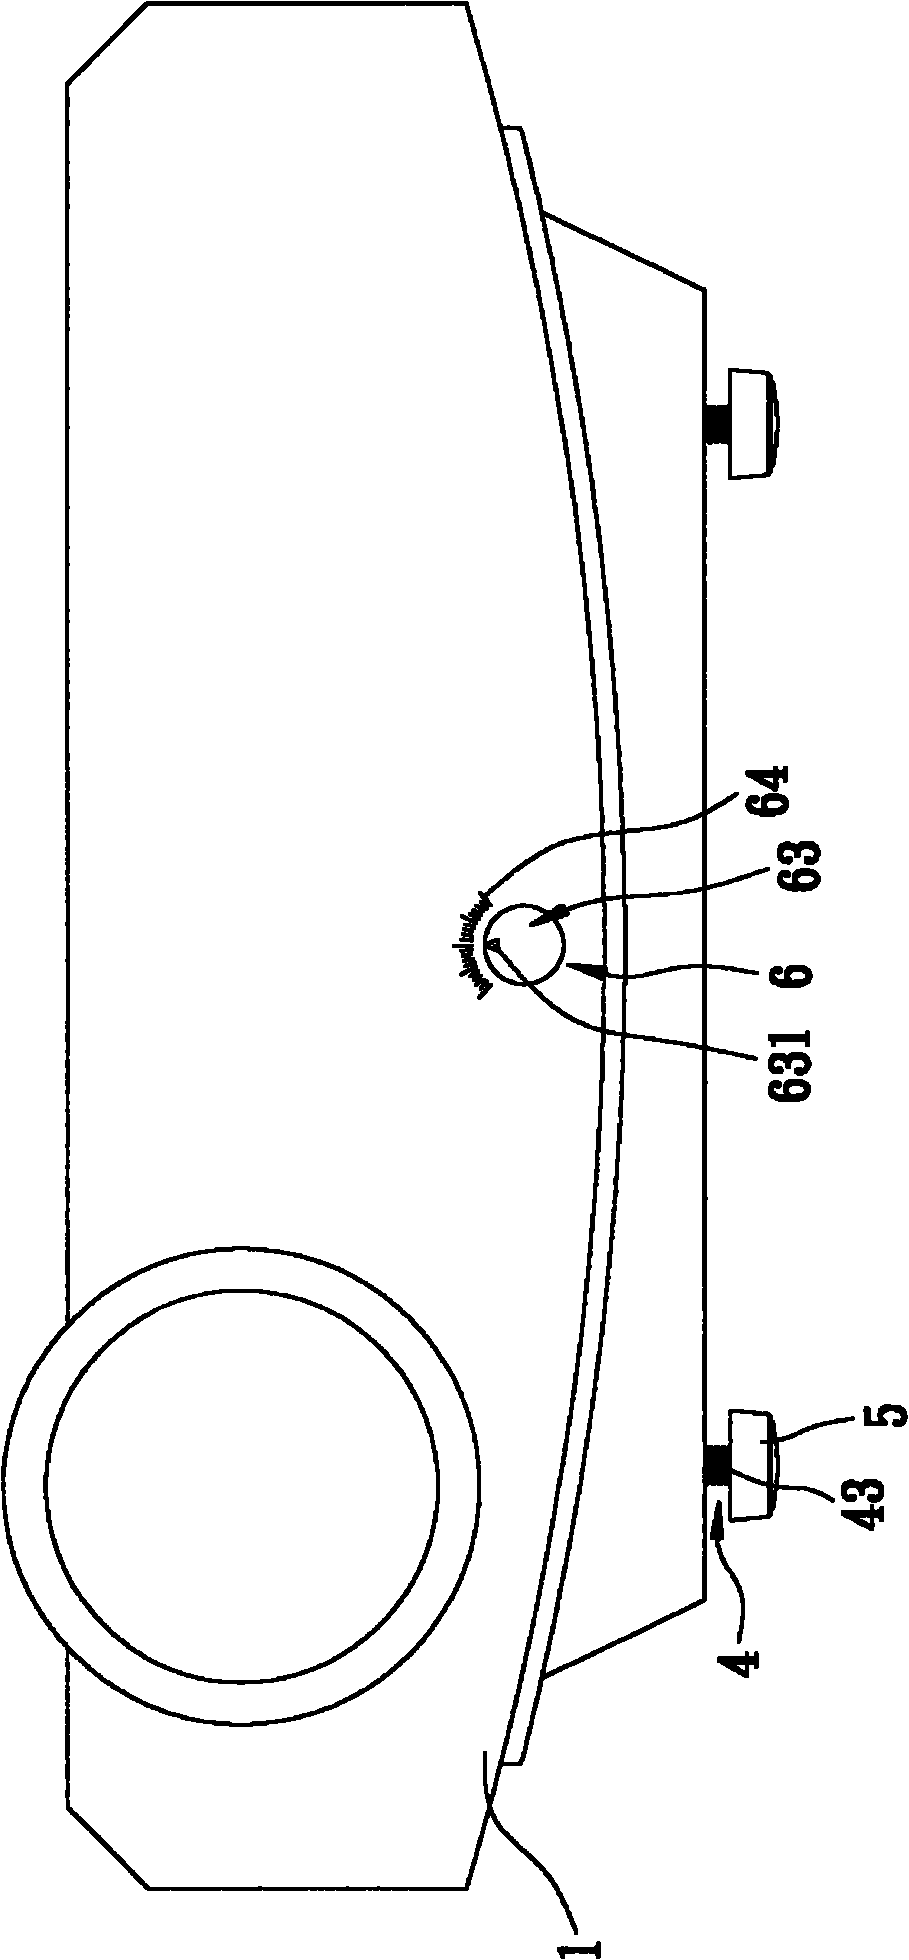 Inclination angle regulation mechanism for projector